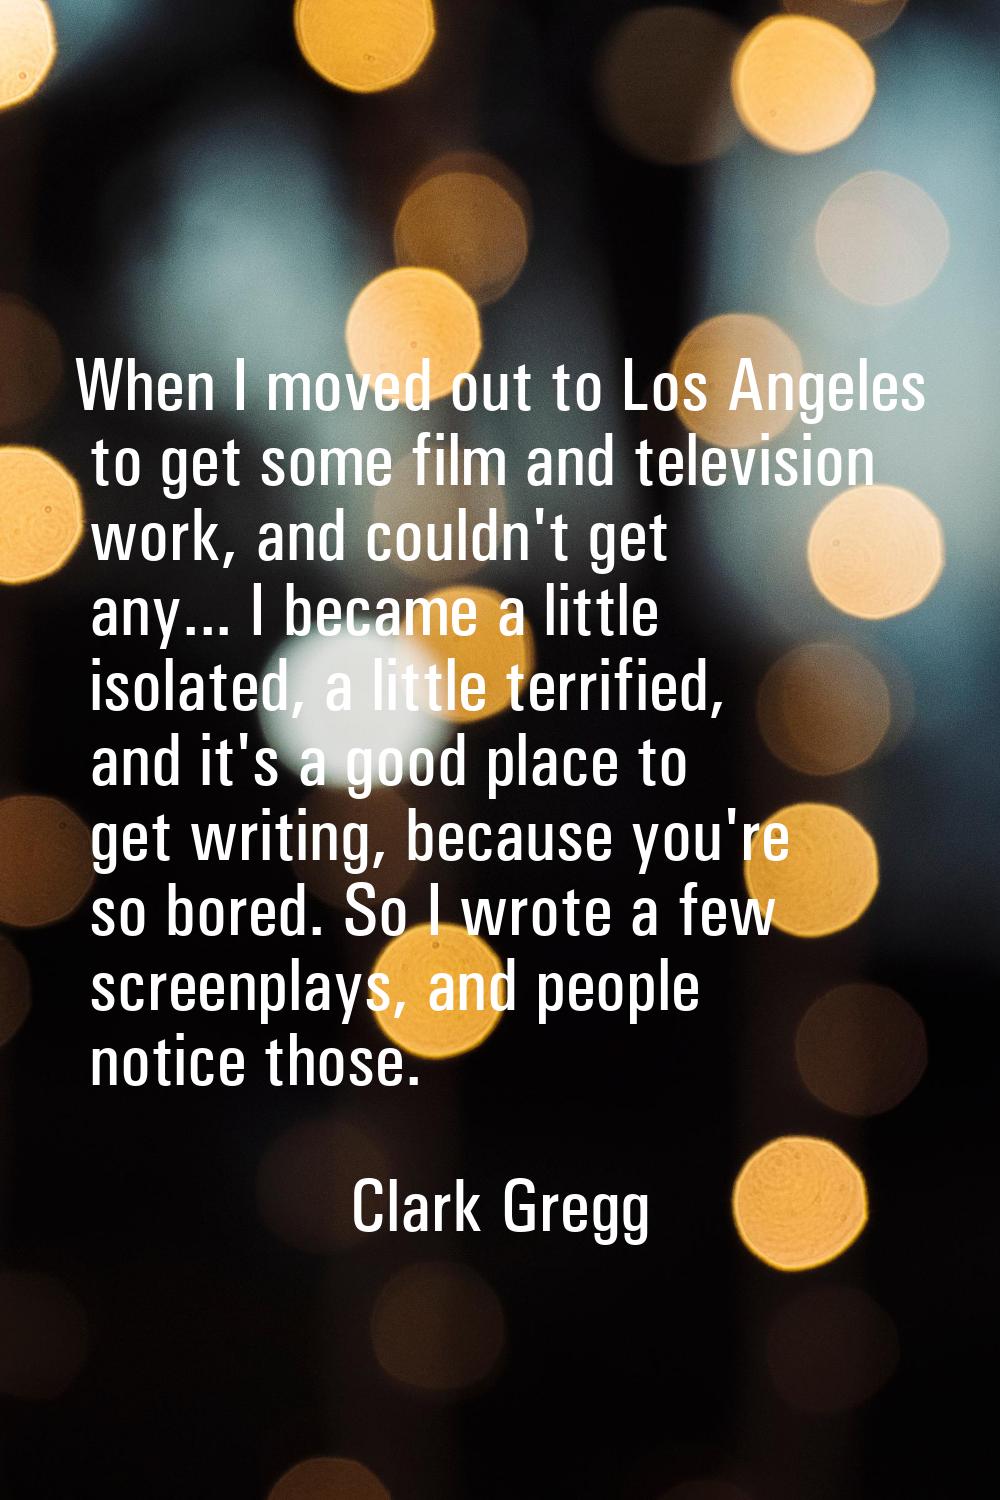 When I moved out to Los Angeles to get some film and television work, and couldn't get any... I bec